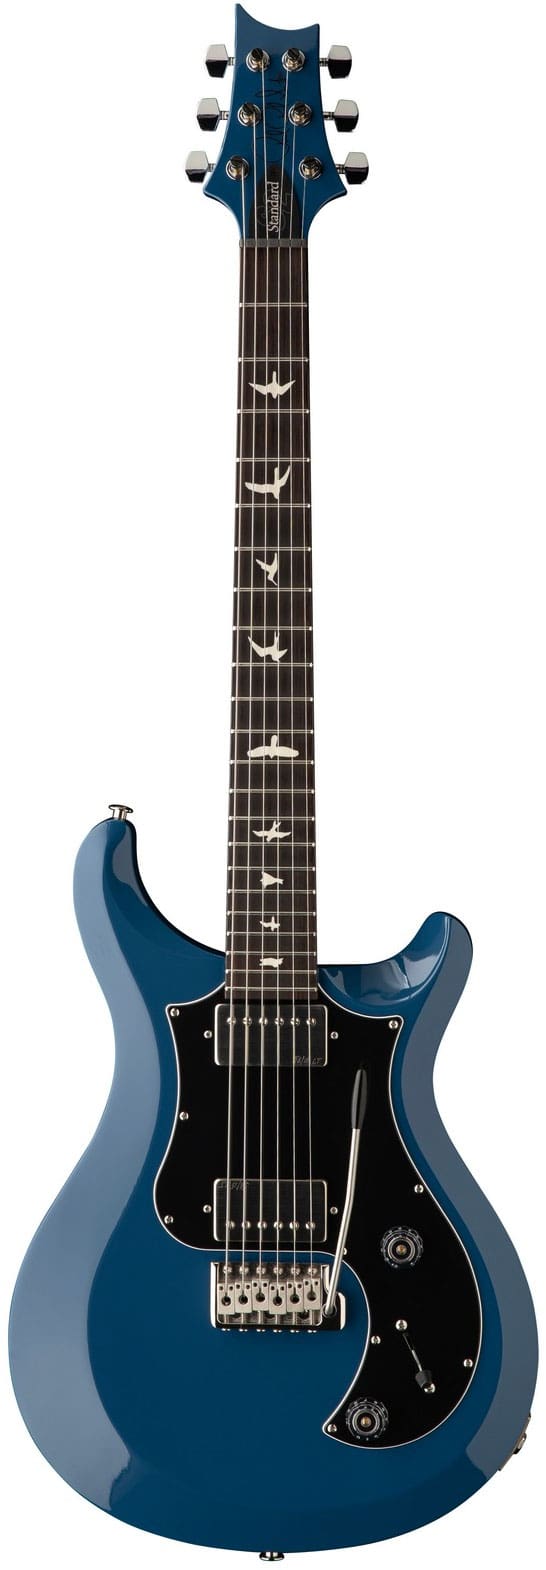 PRS - PAUL REED SMITH S2 STANDARD 22 SPACE BLUE